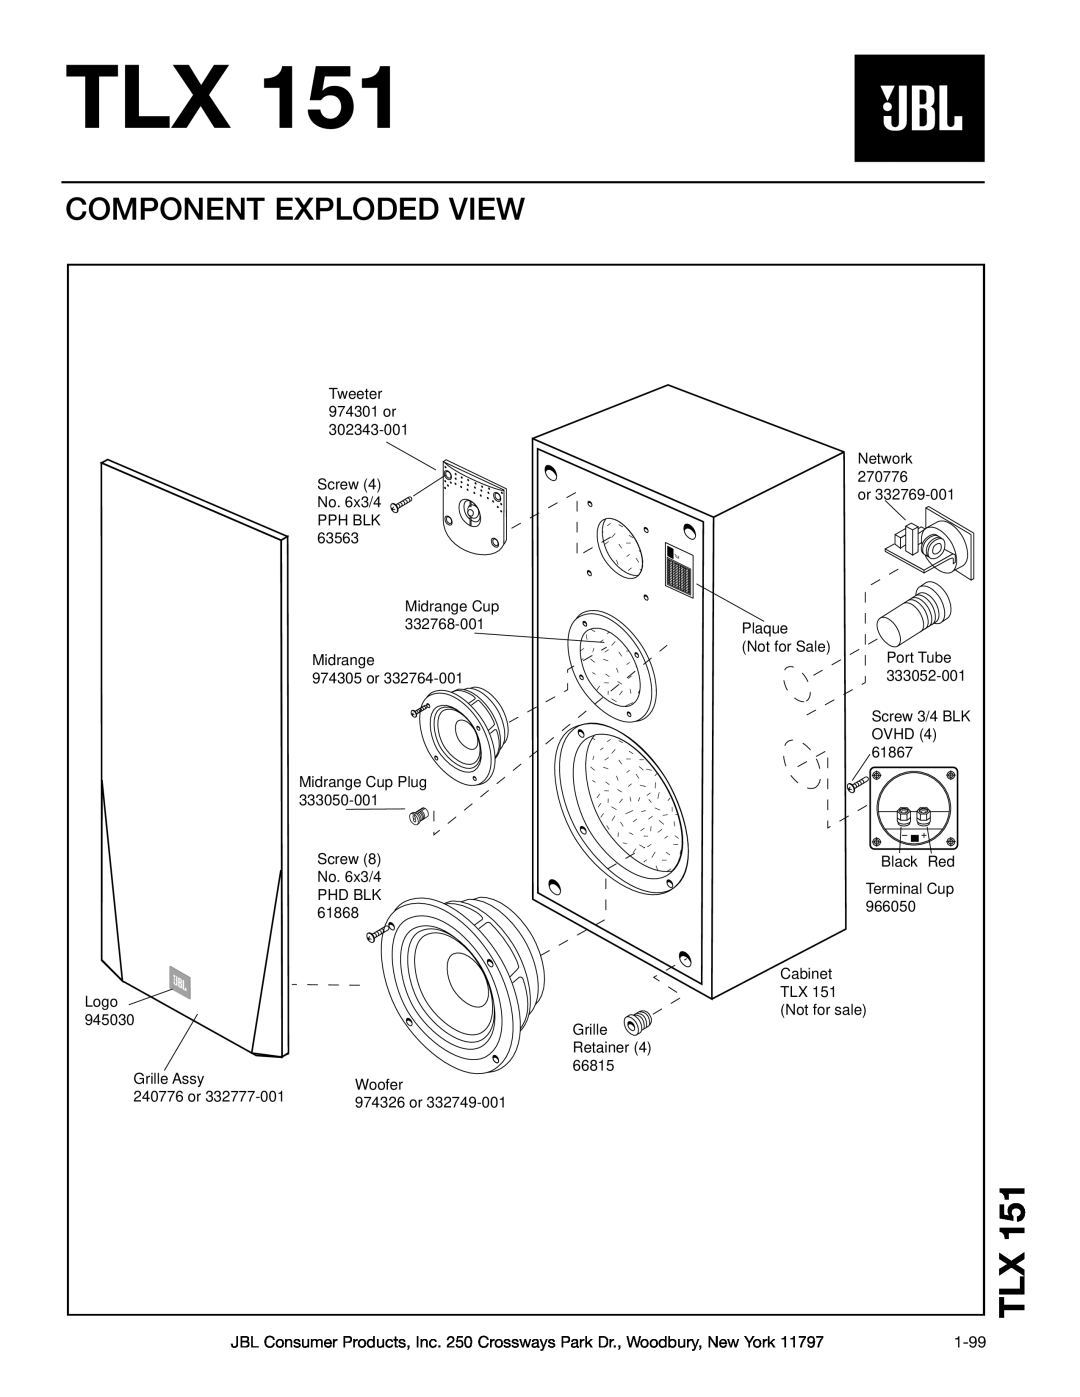 JBL TLX151 technical manual Component Exploded View 